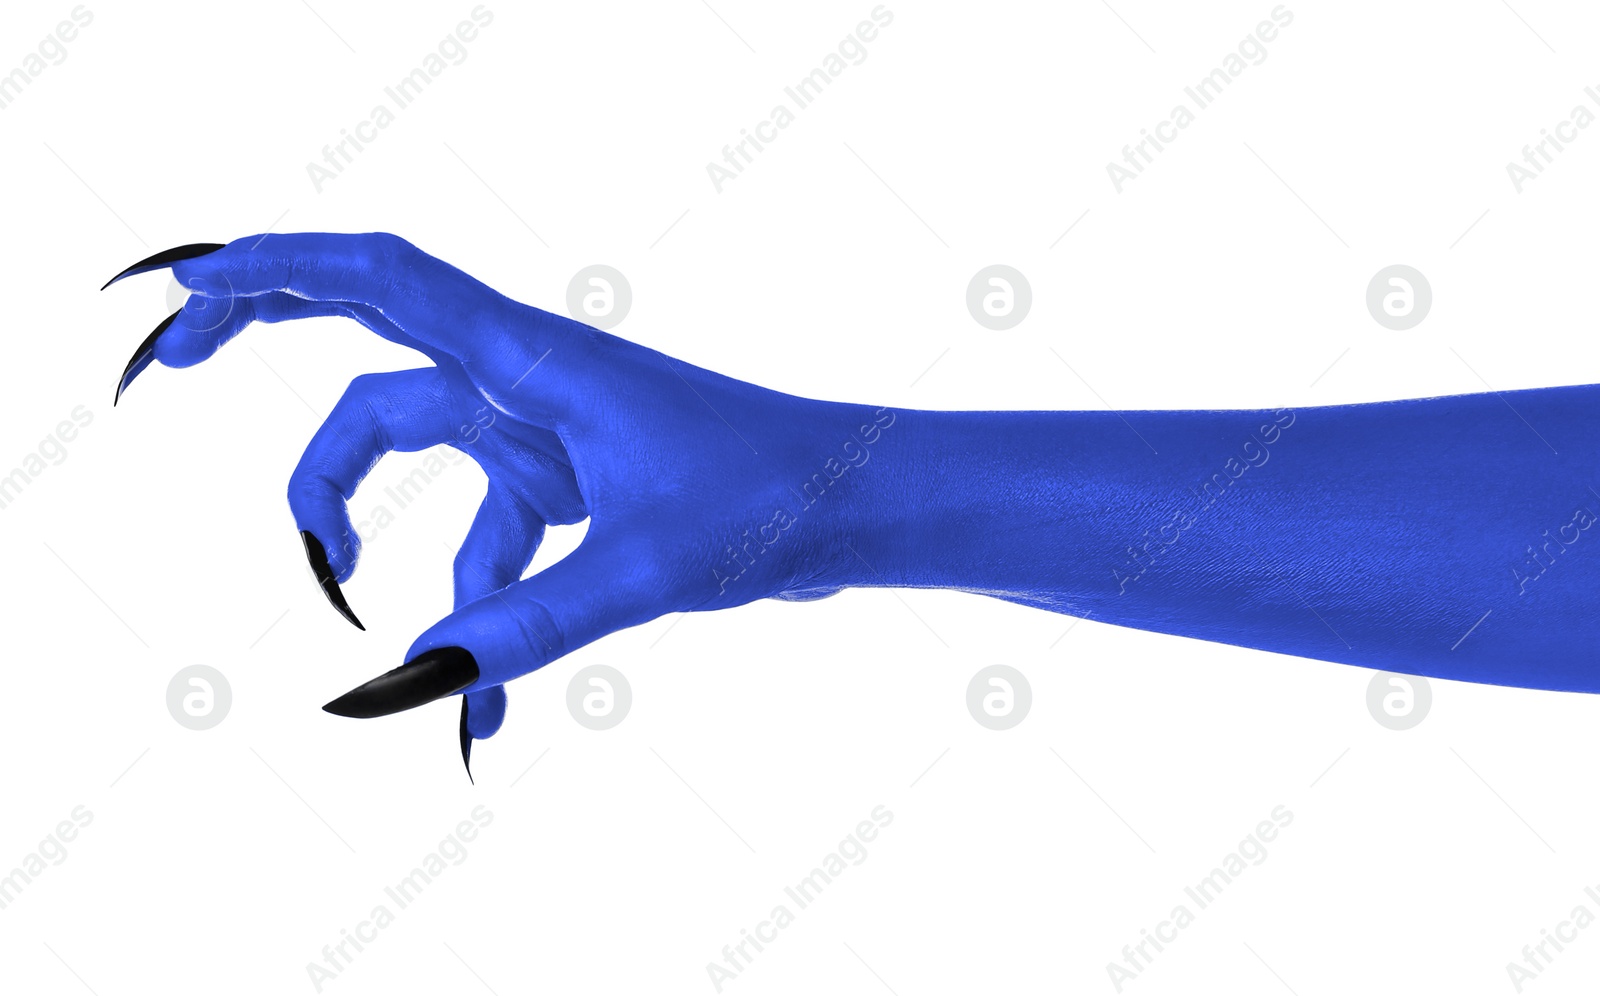 Image of Creepy monster. Blue hand with claws isolated on white